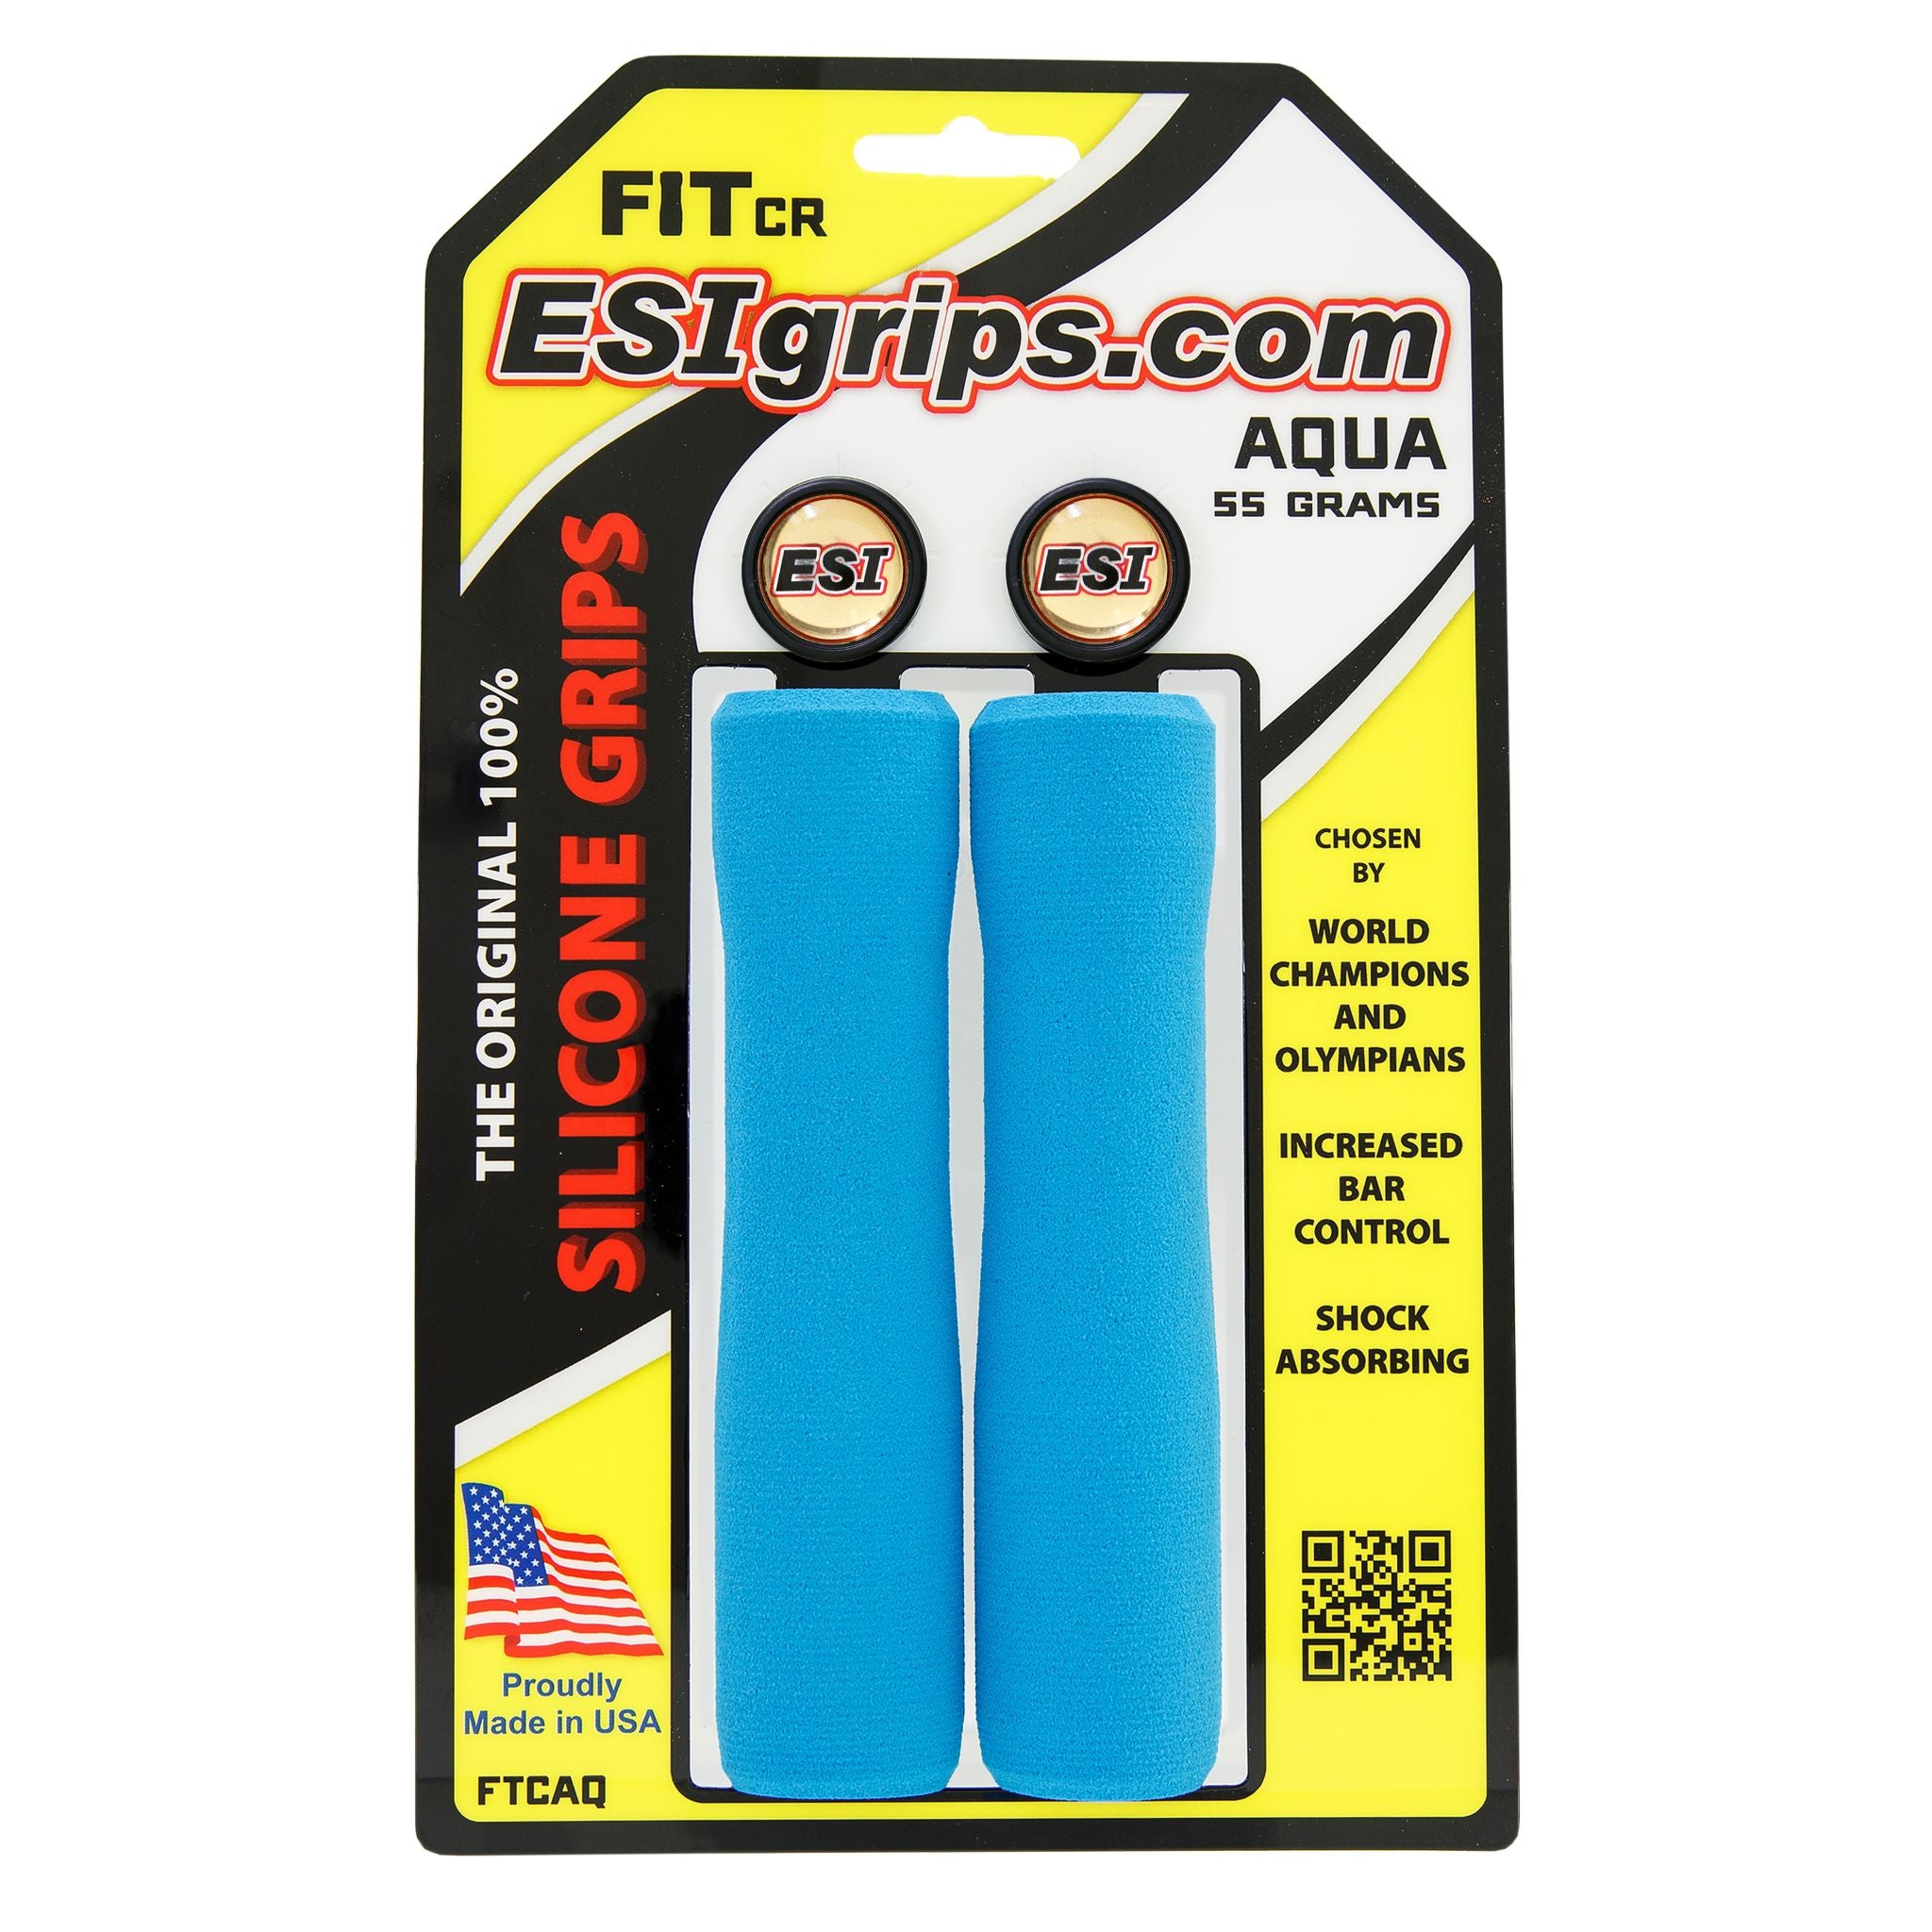 ESI Fit CR Contour Silicone Grips